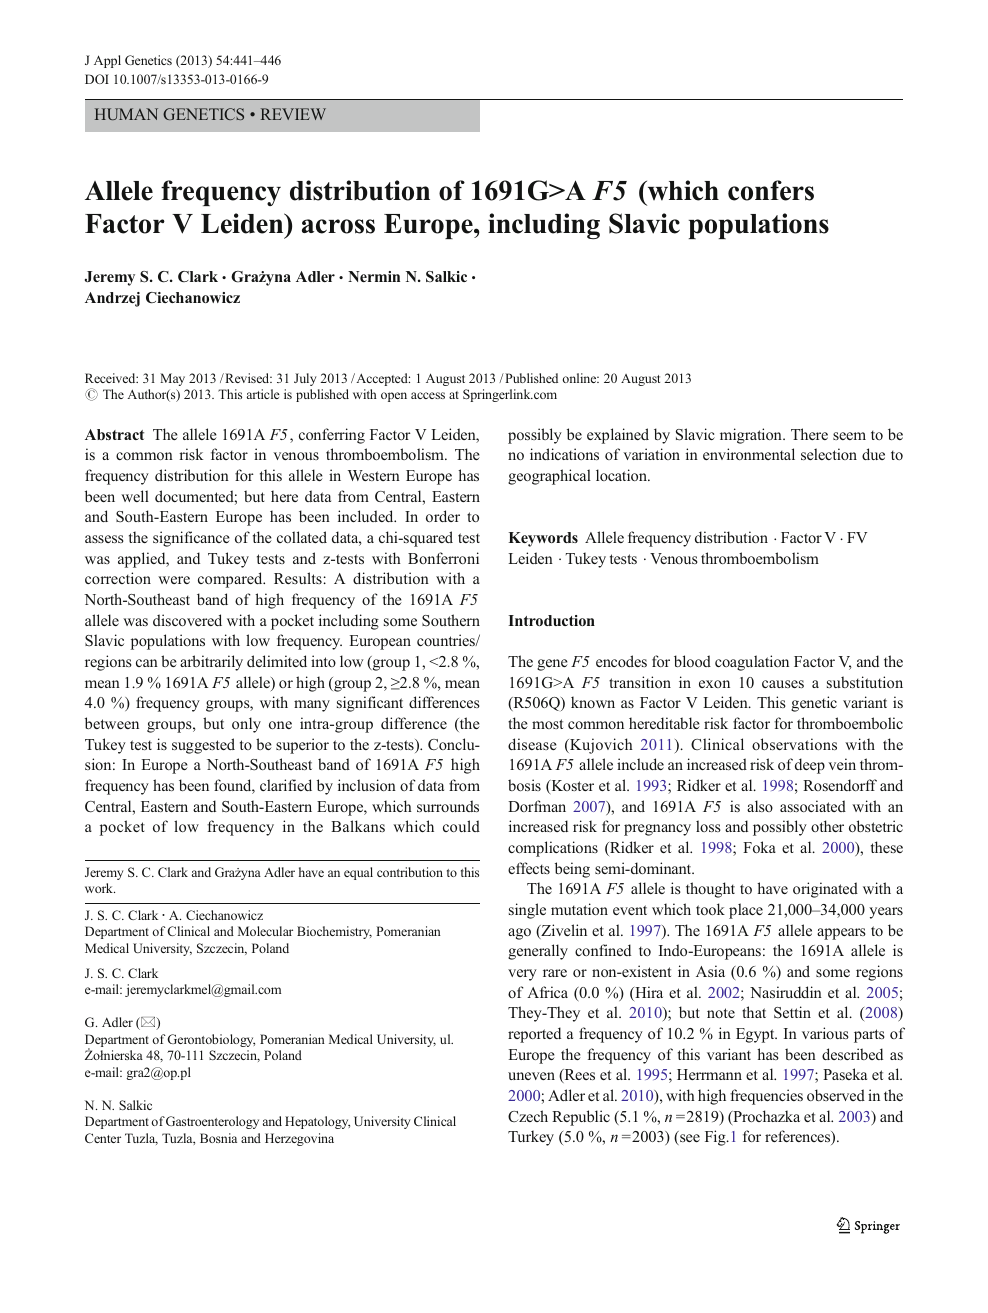 Allele Frequency Distribution Of 1691g A F5 Which Confers Factor V Leiden Across Europe Including Slavic Populations Topic Of Research Paper In Health Sciences Download Scholarly Article Pdf And Read For Free